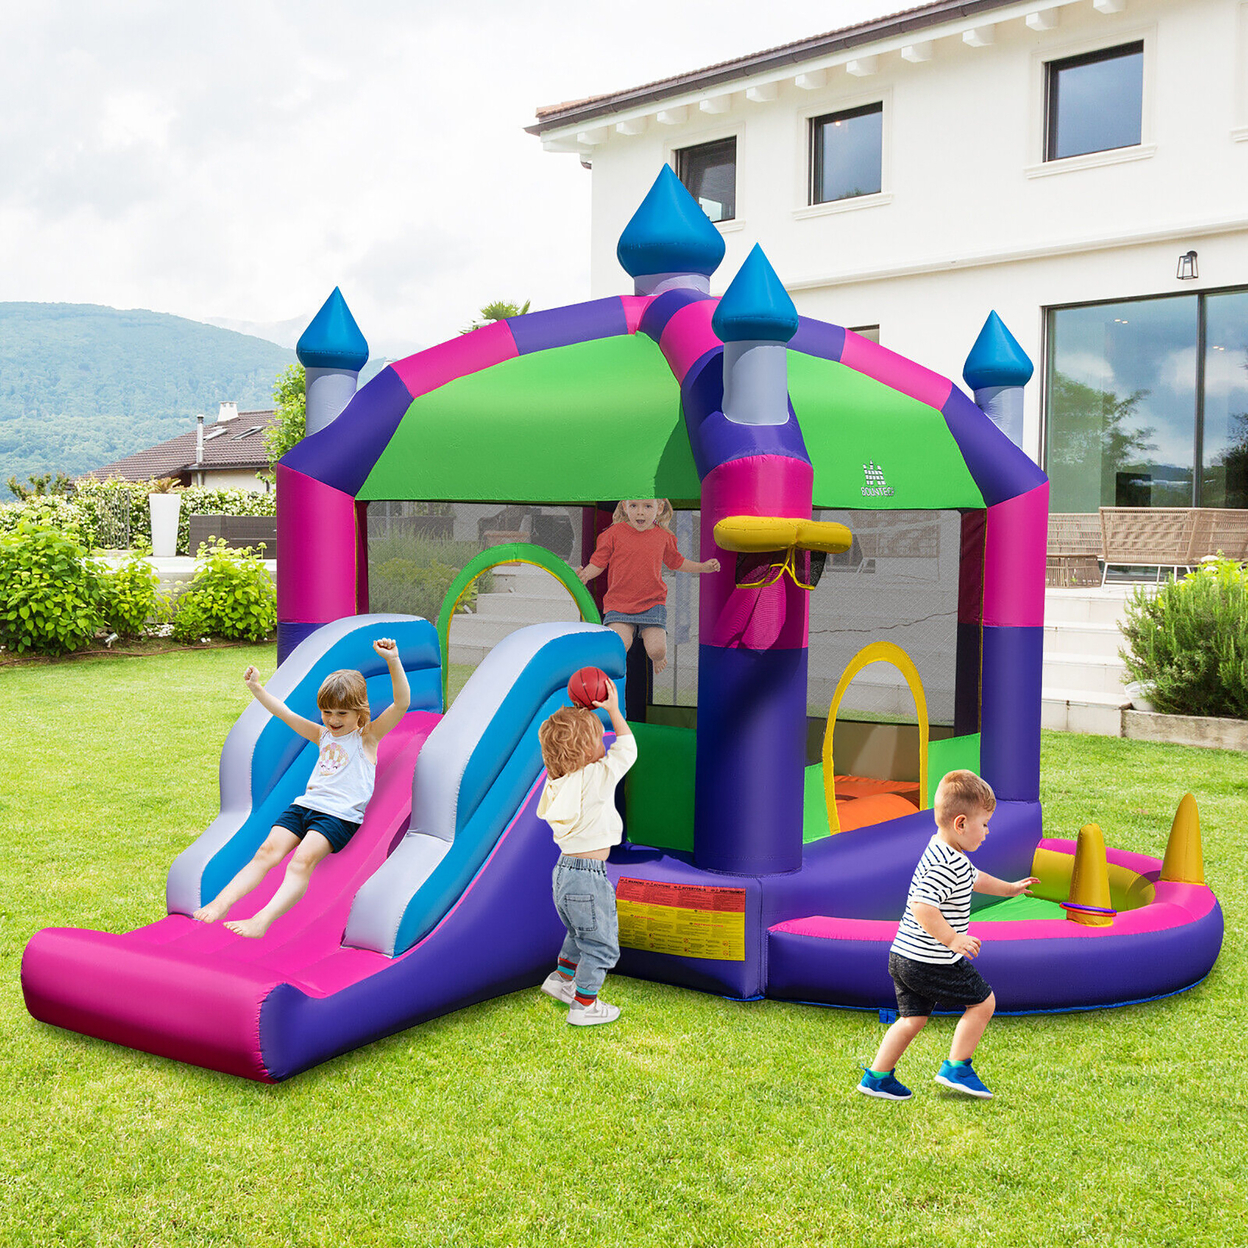 Inflatable Bounce Castle W/ Sun Roof 5-in-1 Jumping Bounce Castle Without Blower